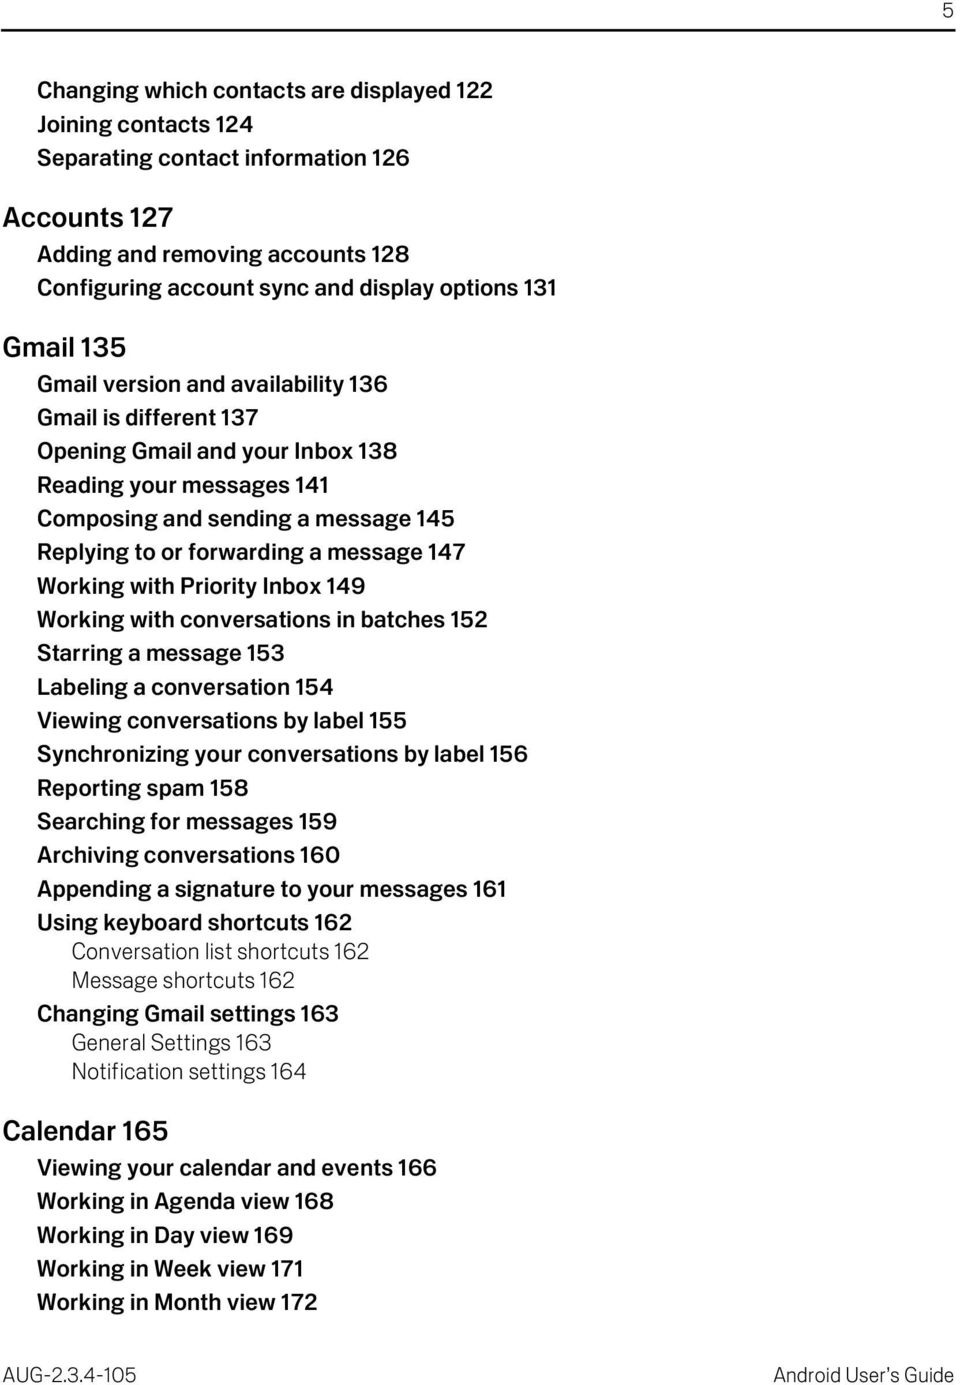 147 Working with Priority Inbox 149 Working with conversations in batches 152 Starring a message 153 Labeling a conversation 154 Viewing conversations by label 155 Synchronizing your conversations by